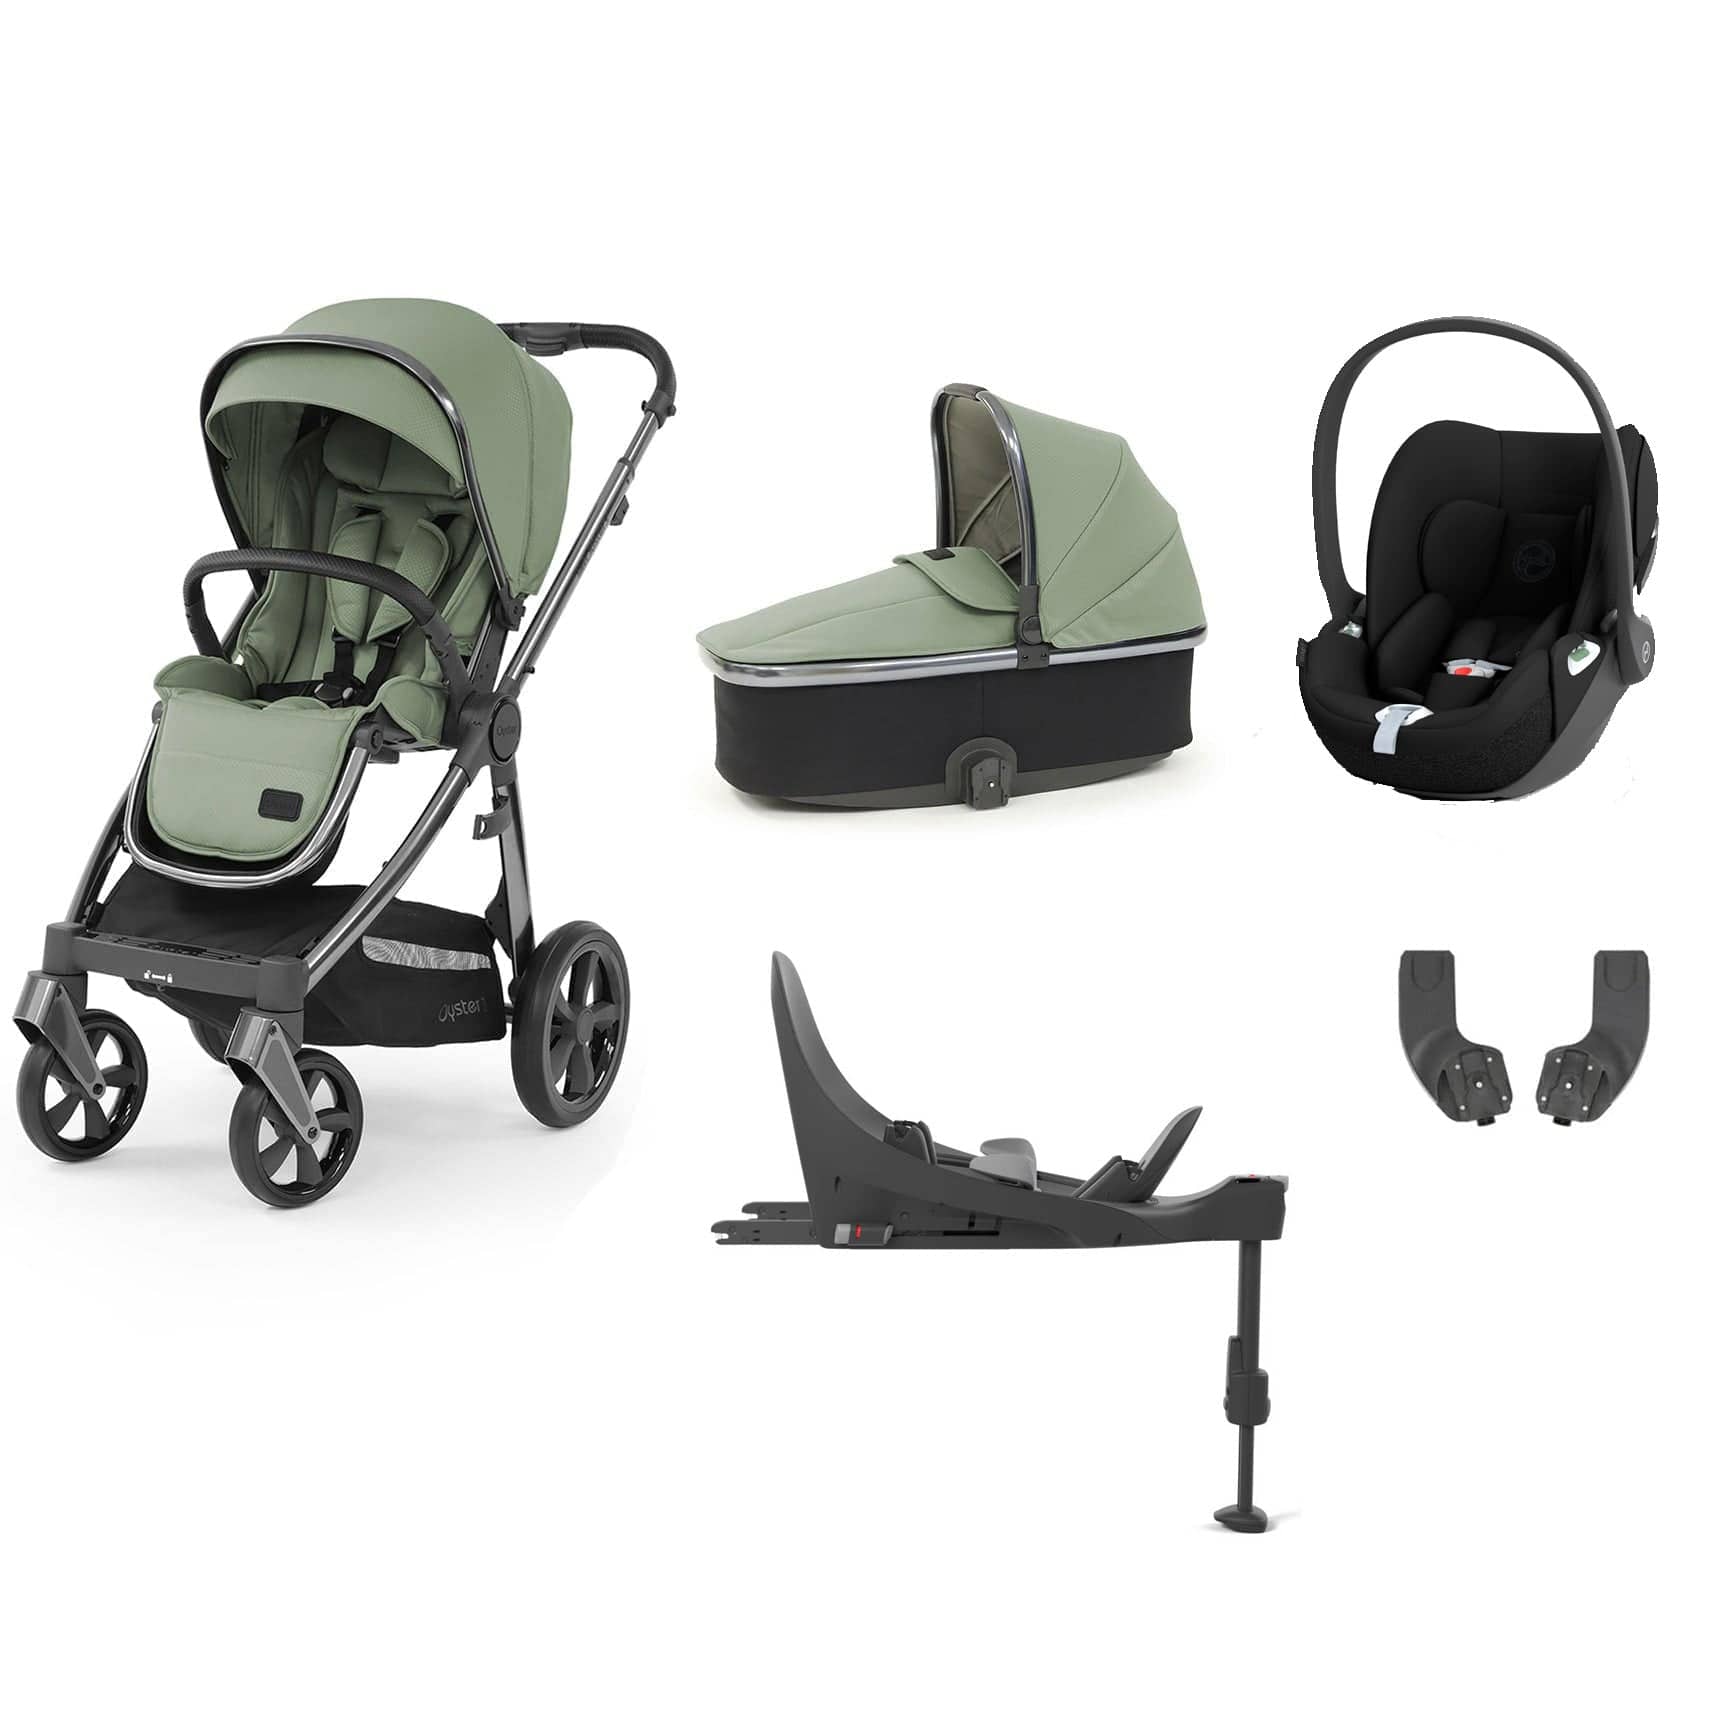 BabyStyle travel systems Babystyle Oyster 3 Essential Bundle with Car Seat - Spearmint 13527-SPM